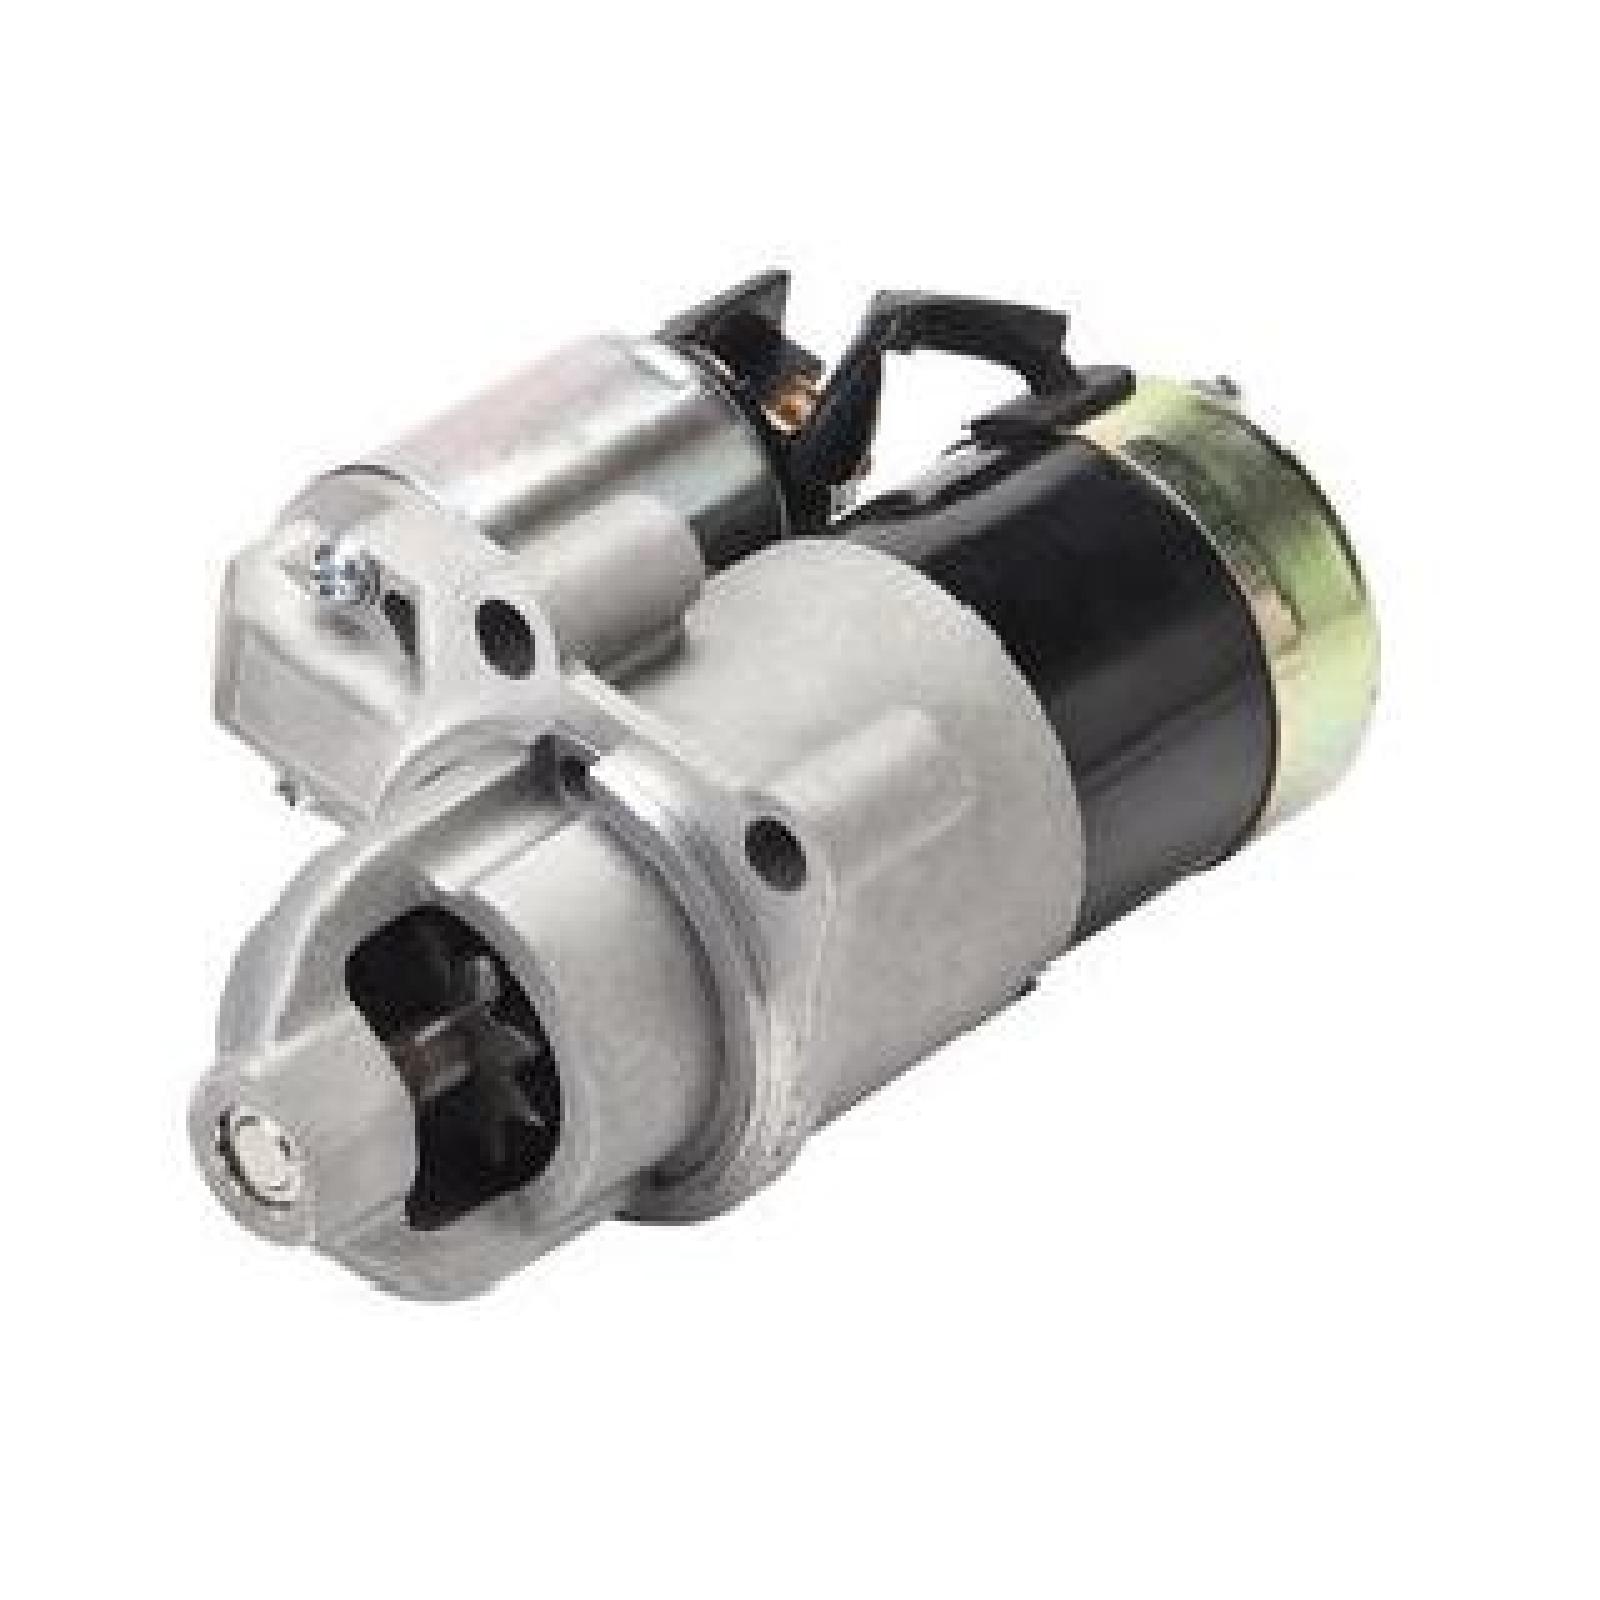 STARTER MOTOR ELECTRIC ON part# 33-732 by Oregon